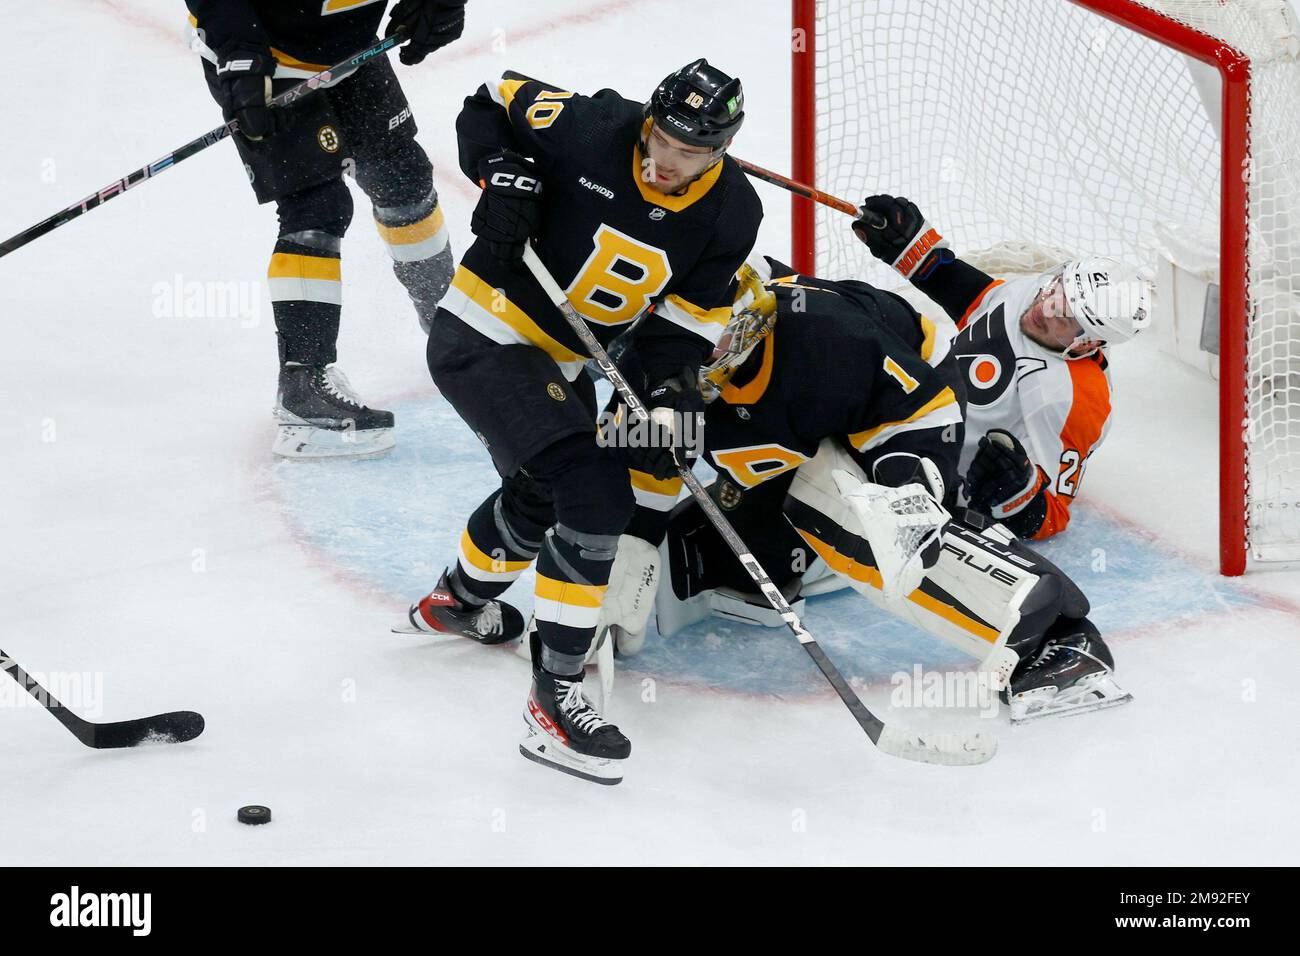 Boston Bruins' A.J. Greer during the second period of an NHL